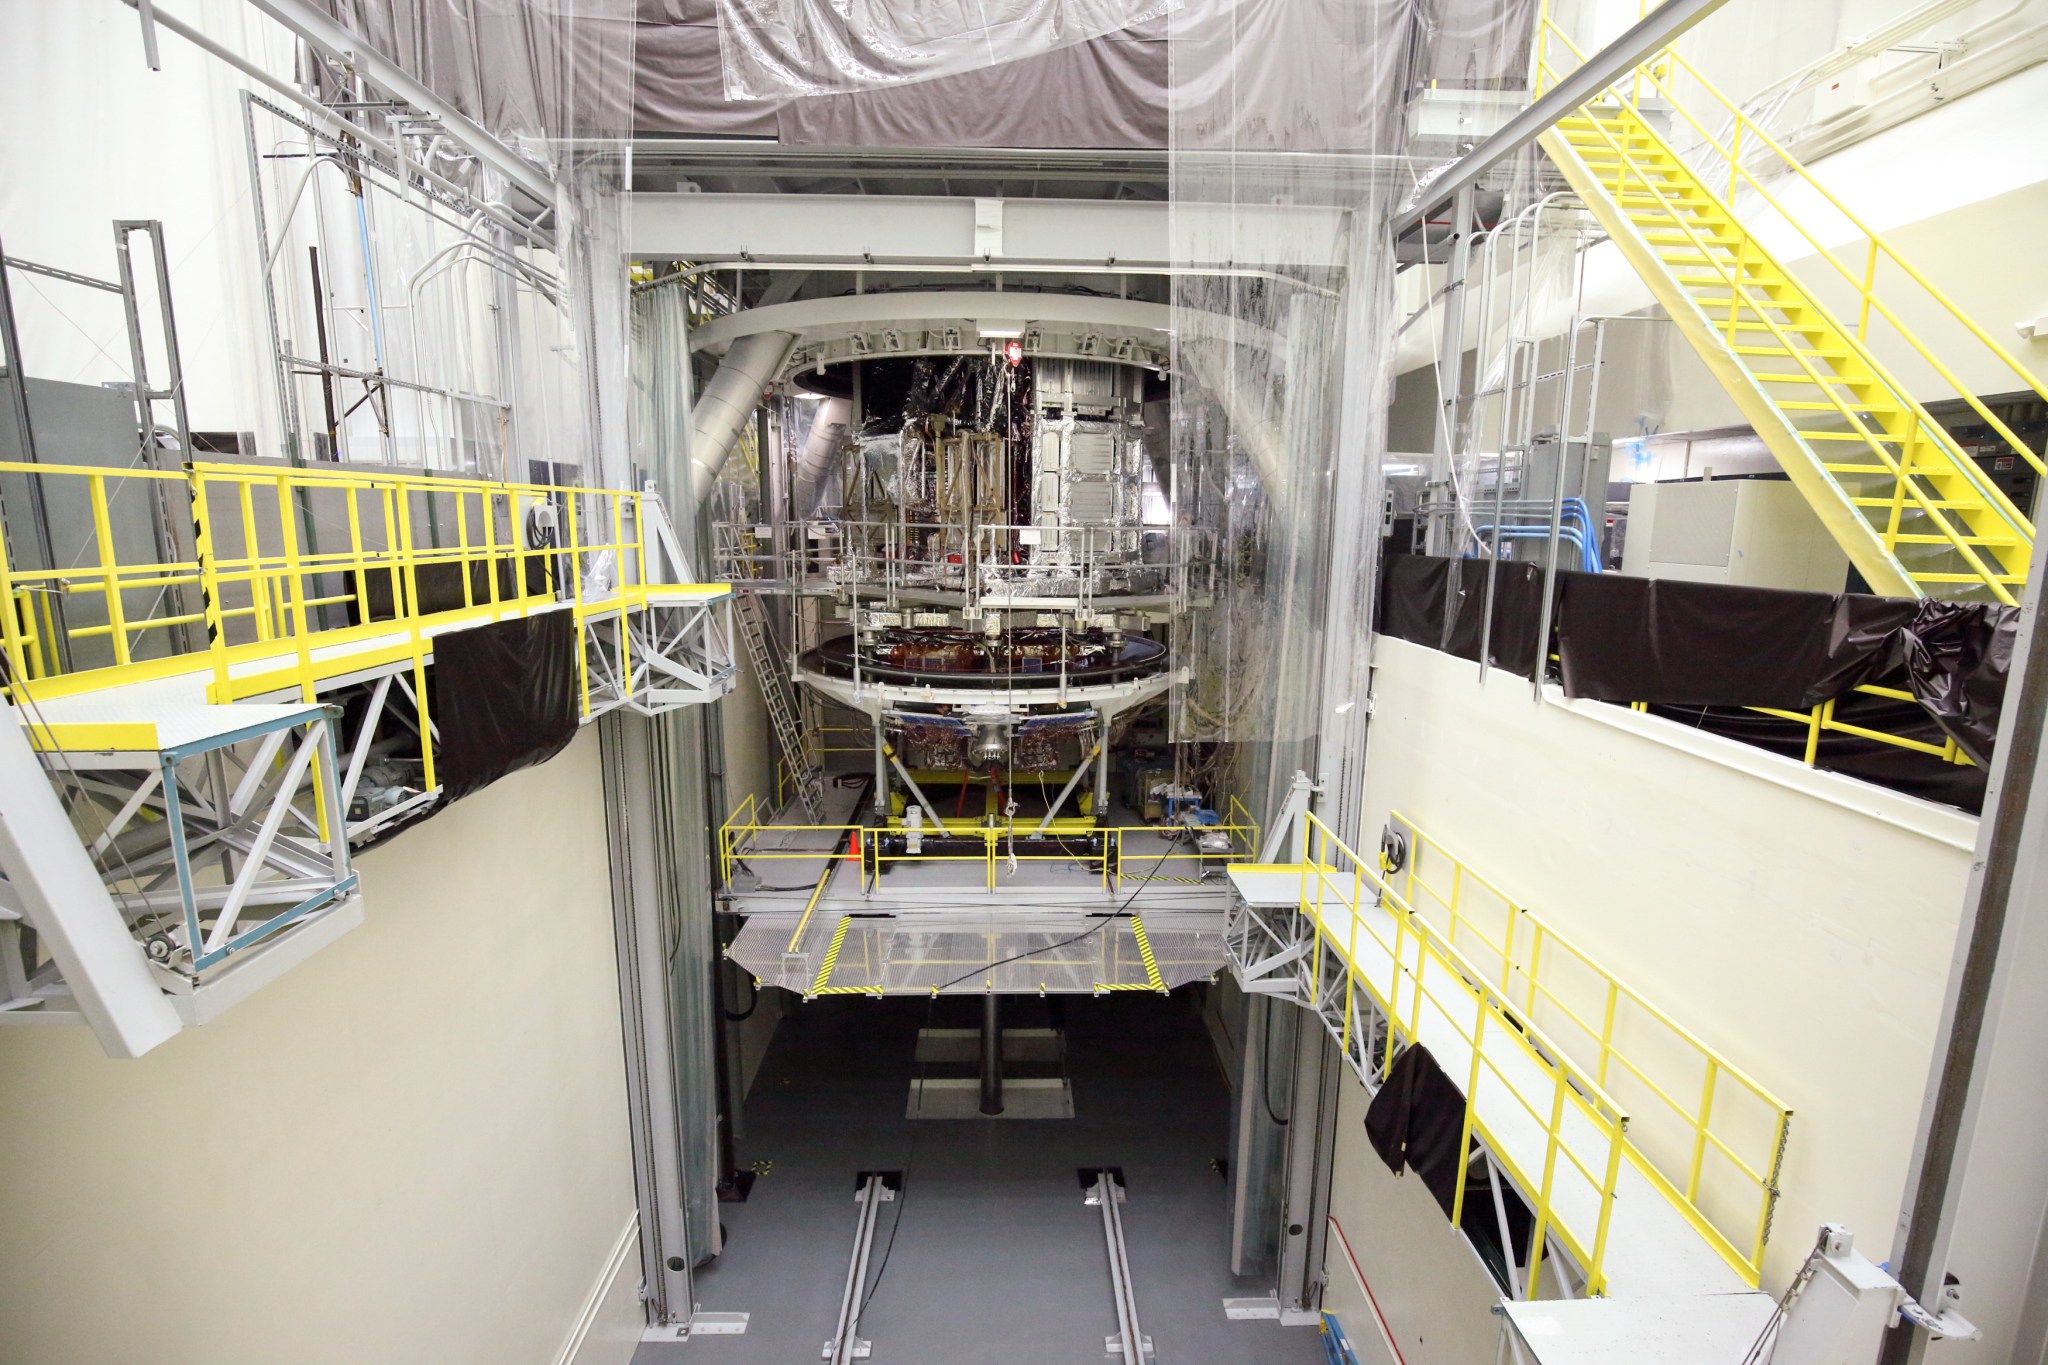 Webb’s spacecraft being lifted into Northrop Grumman’s thermal vacuum chamber for environmental testing.